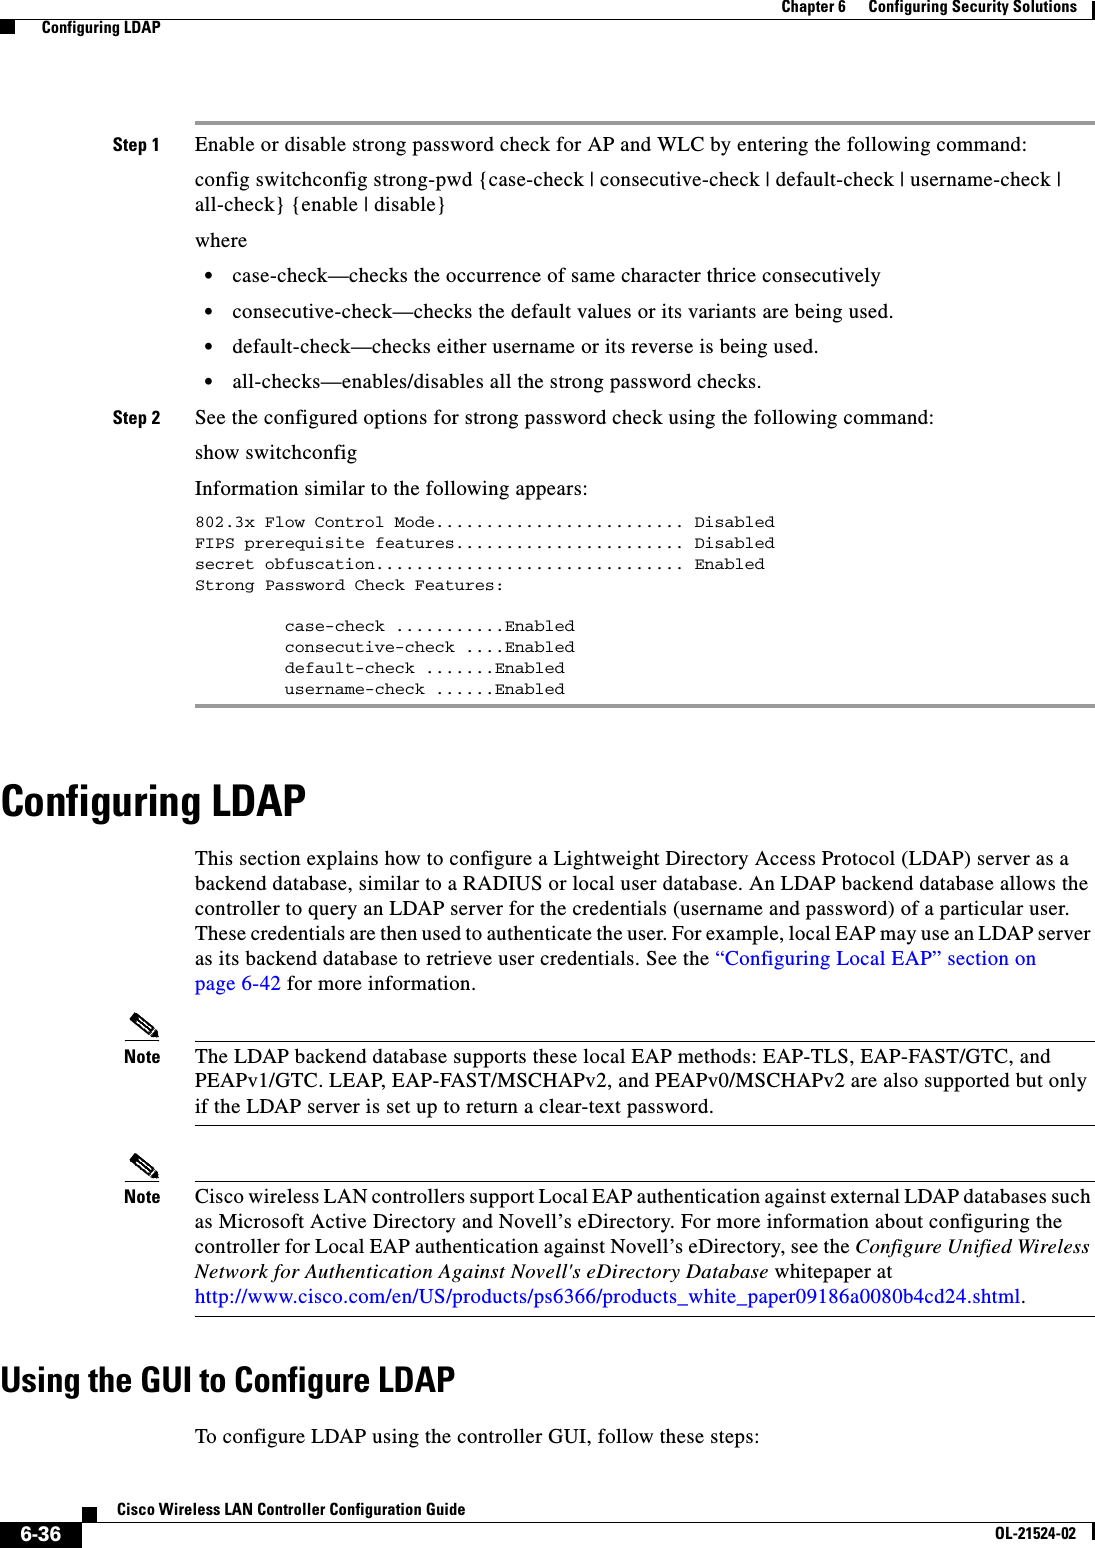  6-36Cisco Wireless LAN Controller Configuration GuideOL-21524-02Chapter 6      Configuring Security Solutions  Configuring LDAPStep 1 Enable or disable strong password check for AP and WLC by entering the following command:config switchconfig strong-pwd {case-check | consecutive-check | default-check | username-check | all-check} {enable | disable}where   • case-check—checks the occurrence of same character thrice consecutively  • consecutive-check—checks the default values or its variants are being used.  • default-check—checks either username or its reverse is being used.  • all-checks—enables/disables all the strong password checks.Step 2 See the configured options for strong password check using the following command:show switchconfigInformation similar to the following appears:802.3x Flow Control Mode......................... DisabledFIPS prerequisite features....................... Disabledsecret obfuscation............................... EnabledStrong Password Check Features:         case-check ...........Enabled         consecutive-check ....Enabled         default-check .......Enabled         username-check ......EnabledConfiguring LDAPThis section explains how to configure a Lightweight Directory Access Protocol (LDAP) server as a backend database, similar to a RADIUS or local user database. An LDAP backend database allows the controller to query an LDAP server for the credentials (username and password) of a particular user. These credentials are then used to authenticate the user. For example, local EAP may use an LDAP server as its backend database to retrieve user credentials. See the “Configuring Local EAP” section on page 6-42 for more information.Note The LDAP backend database supports these local EAP methods: EAP-TLS, EAP-FAST/GTC, and PEAPv1/GTC. LEAP, EAP-FAST/MSCHAPv2, and PEAPv0/MSCHAPv2 are also supported but only if the LDAP server is set up to return a clear-text password.Note Cisco wireless LAN controllers support Local EAP authentication against external LDAP databases such as Microsoft Active Directory and Novell’s eDirectory. For more information about configuring the controller for Local EAP authentication against Novell’s eDirectory, see the Configure Unified Wireless Network for Authentication Against Novell&apos;s eDirectory Database whitepaper at http://www.cisco.com/en/US/products/ps6366/products_white_paper09186a0080b4cd24.shtml.Using the GUI to Configure LDAPTo configure LDAP using the controller GUI, follow these steps: